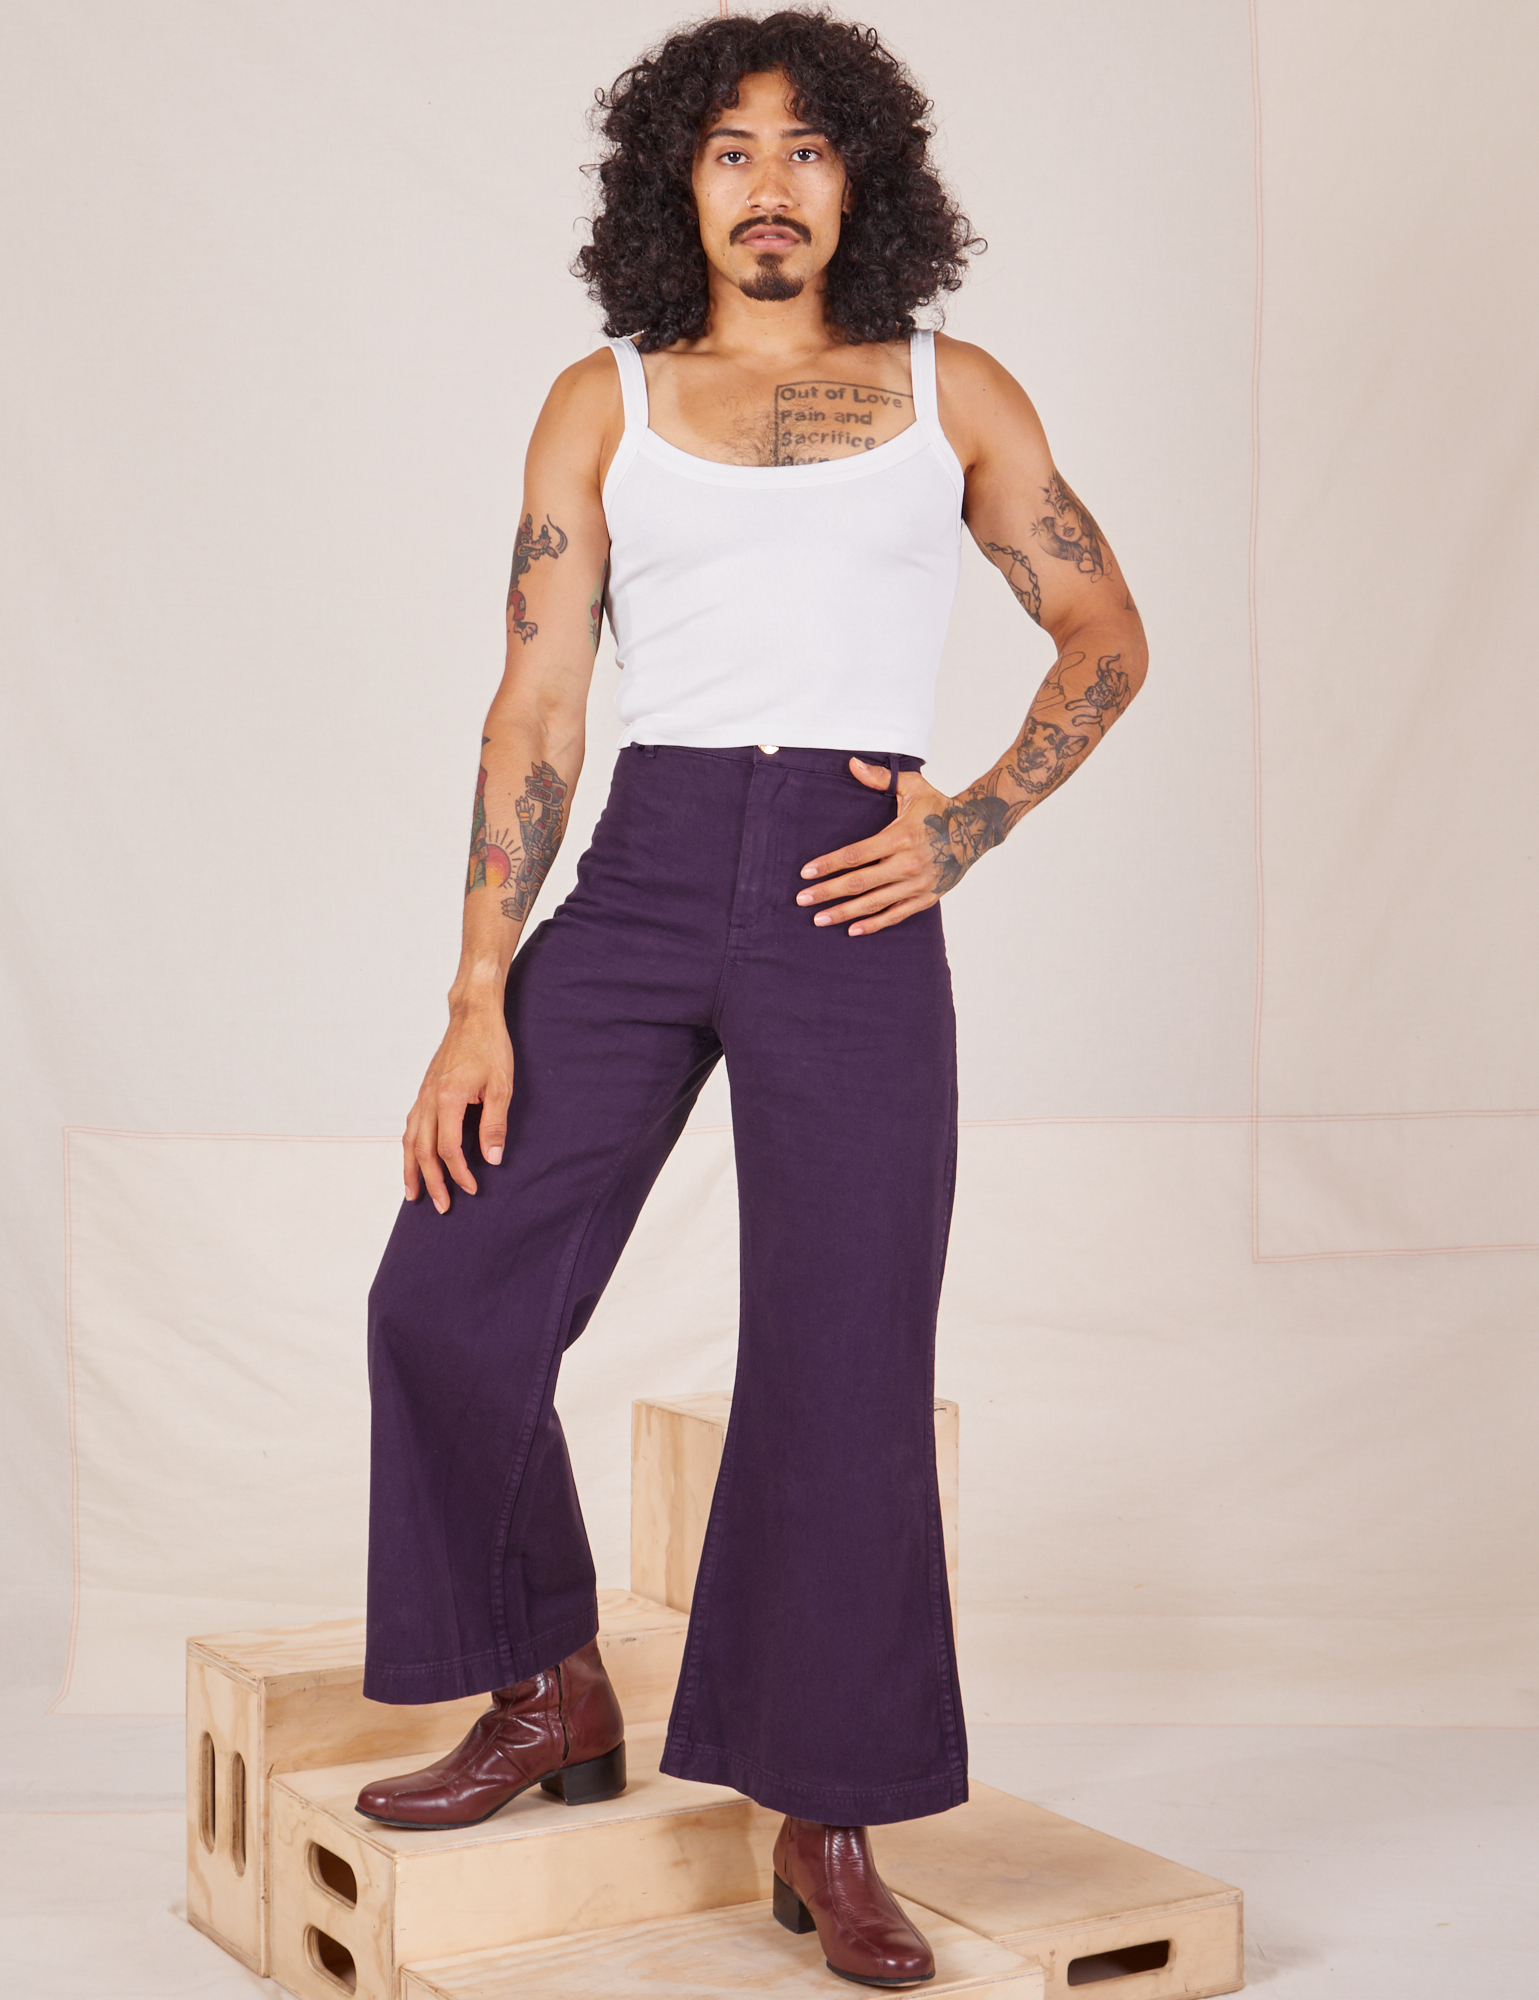 Jesse is 5&#39;8&quot; and wearing XXS Bell Bottoms in Nebula Purple paired with vintage off-white Cami